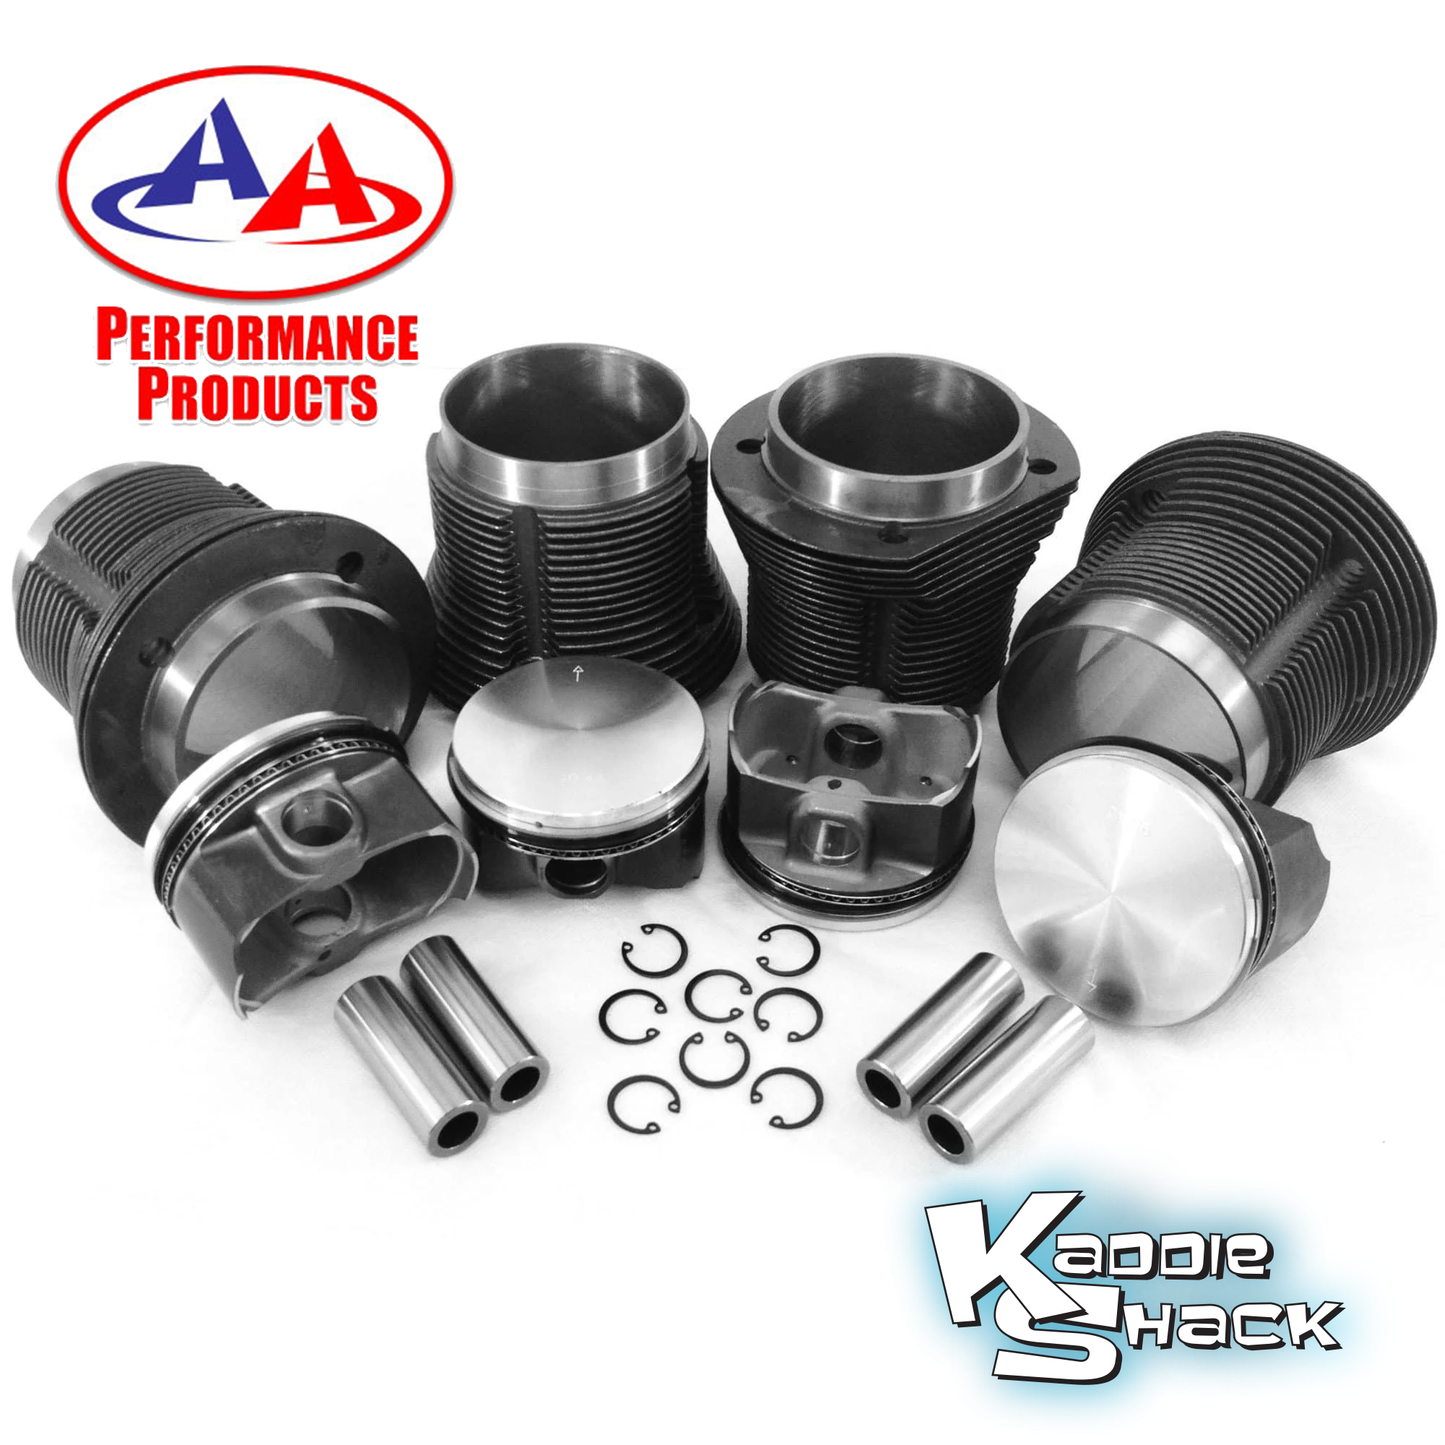 90.5mm X 82mm Performance Pistons and Cylinders